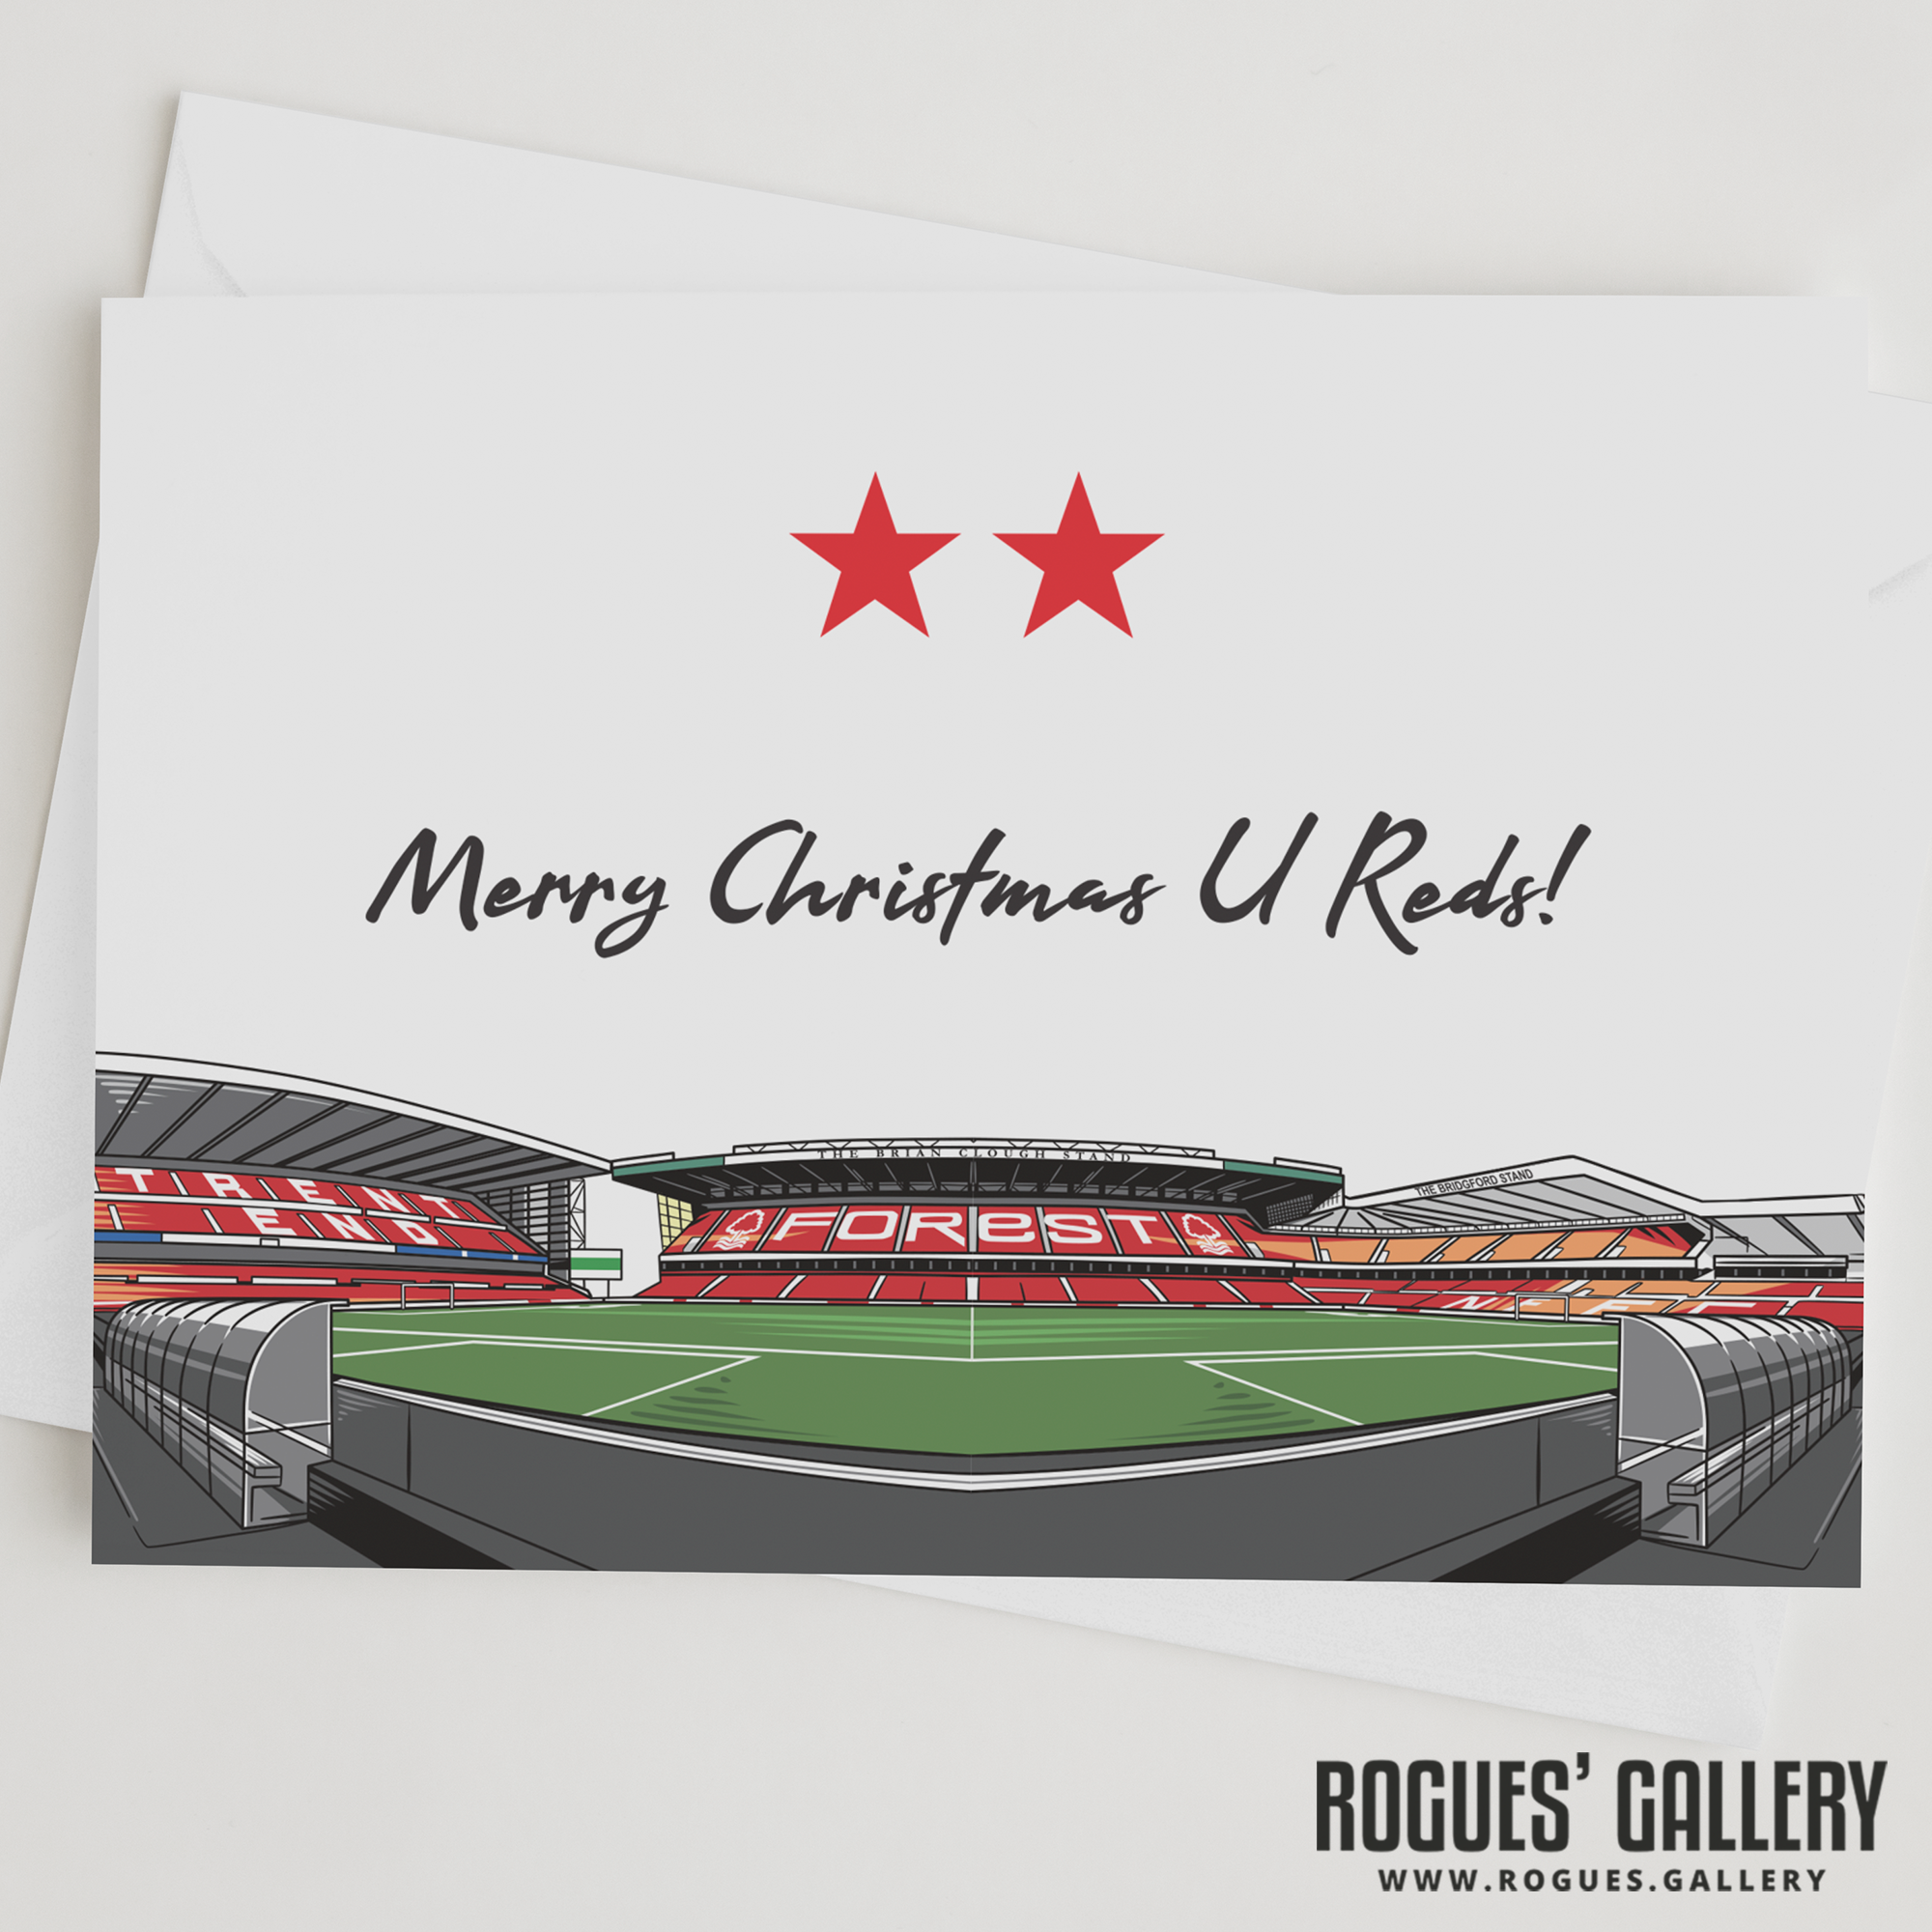 Brian Clough Stand Two Stars The City Ground Nottingham Forest FC Merry Christmas U Reds! Card 6x9"